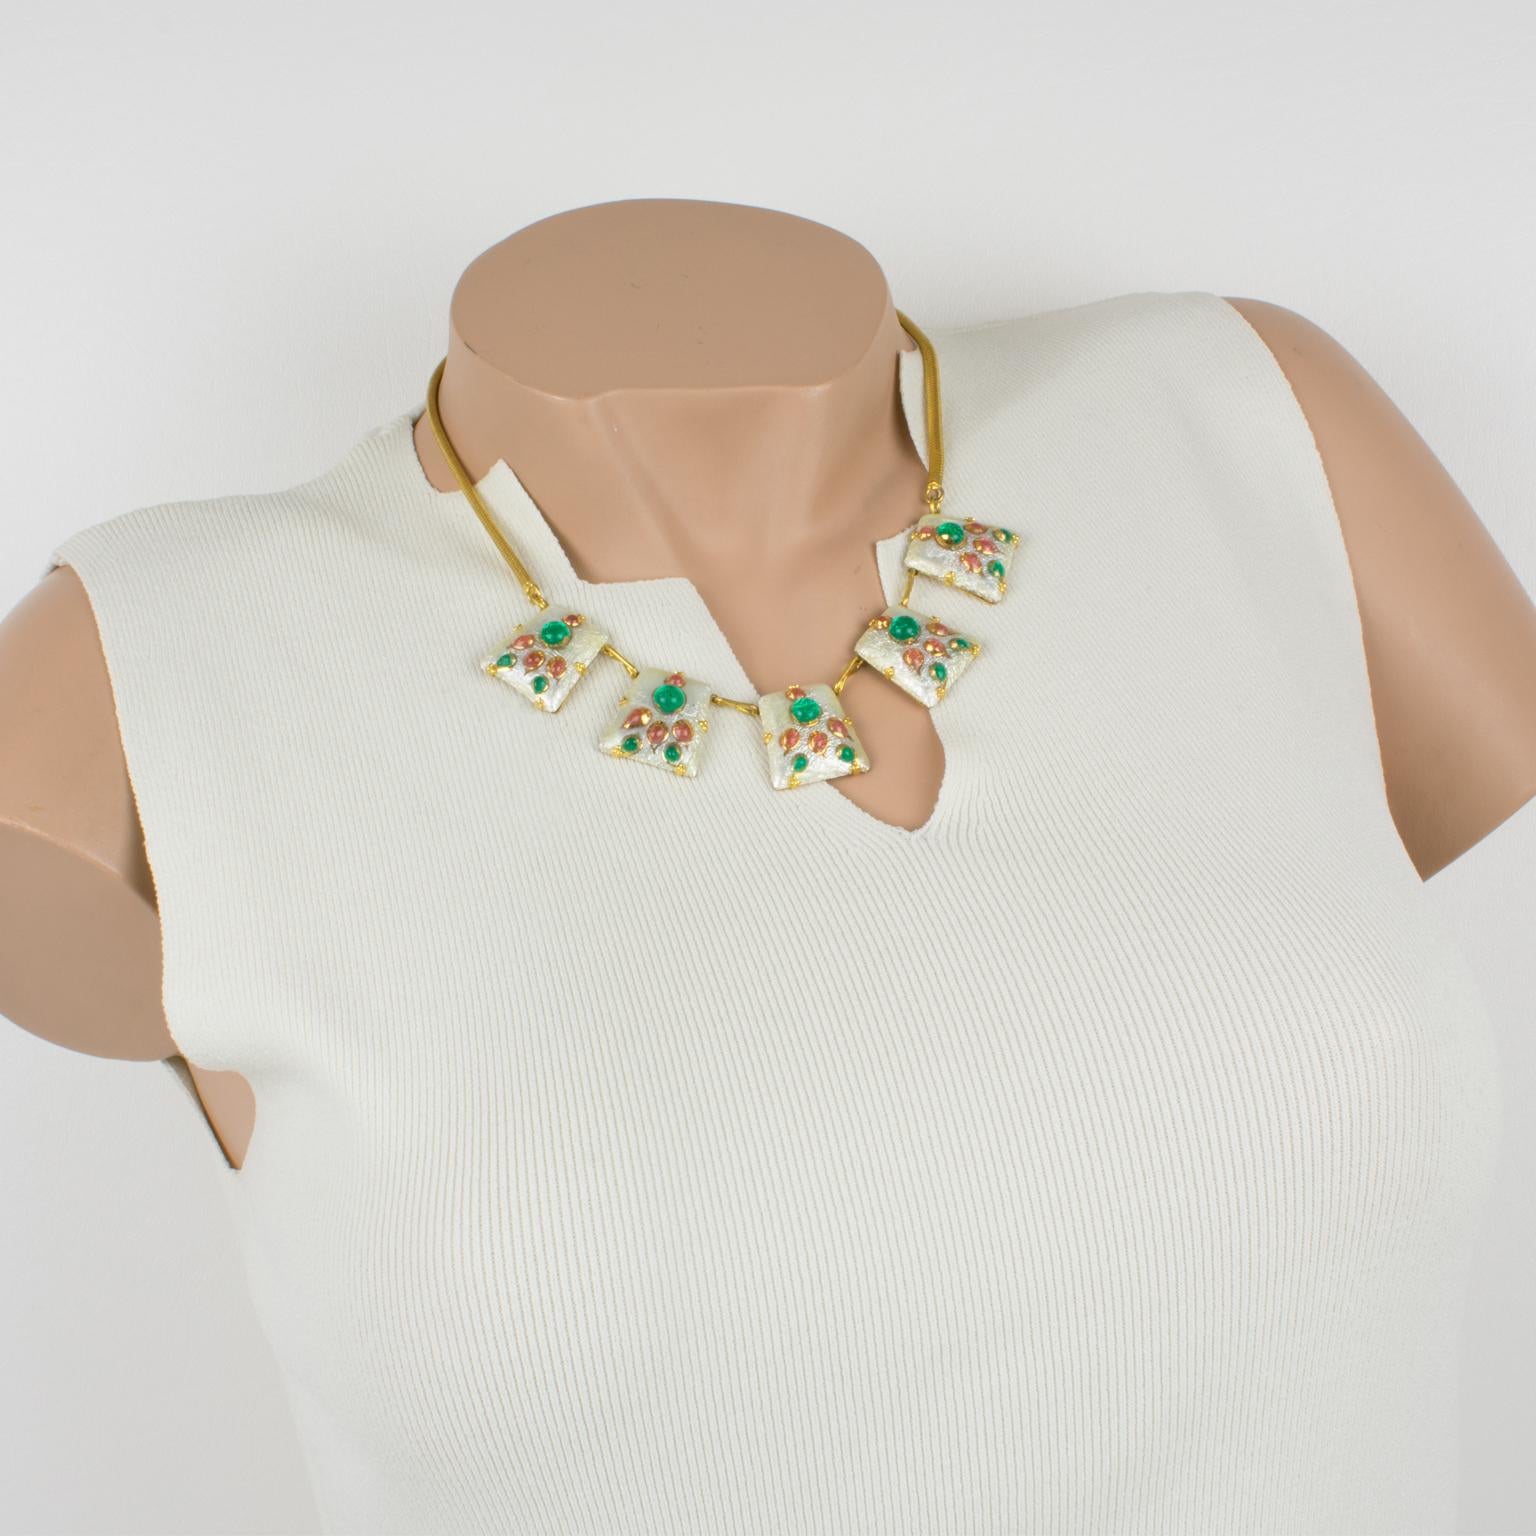 An exquisite enamel and pate de verre link necklace designed in Limoges, France. Enameled domed trapeze copper elements are linked together with gilt metal framing to a turbogas or serpentine chain. This popular 1950s and 1960s technique named